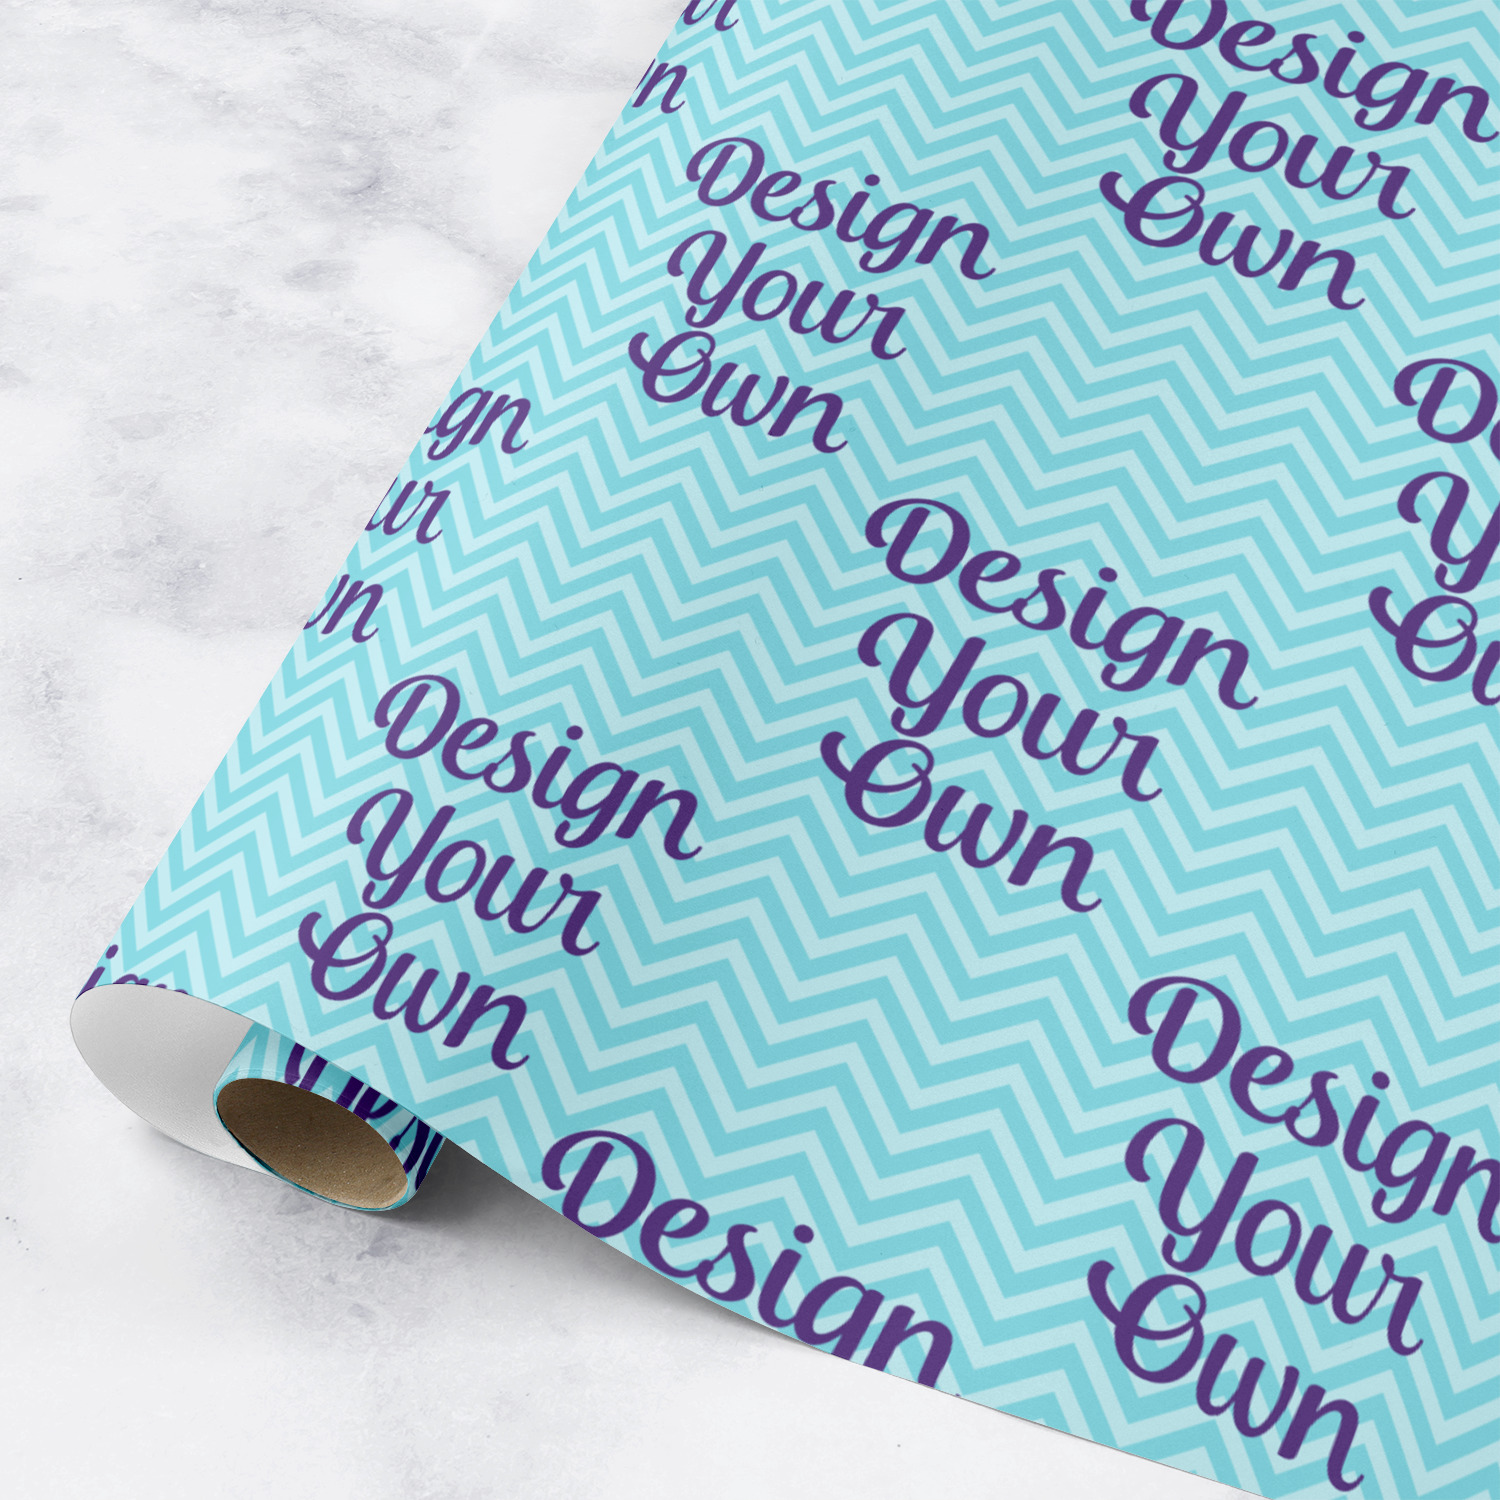 design-your-own-wrapping-paper-roll-large-youcustomizeit